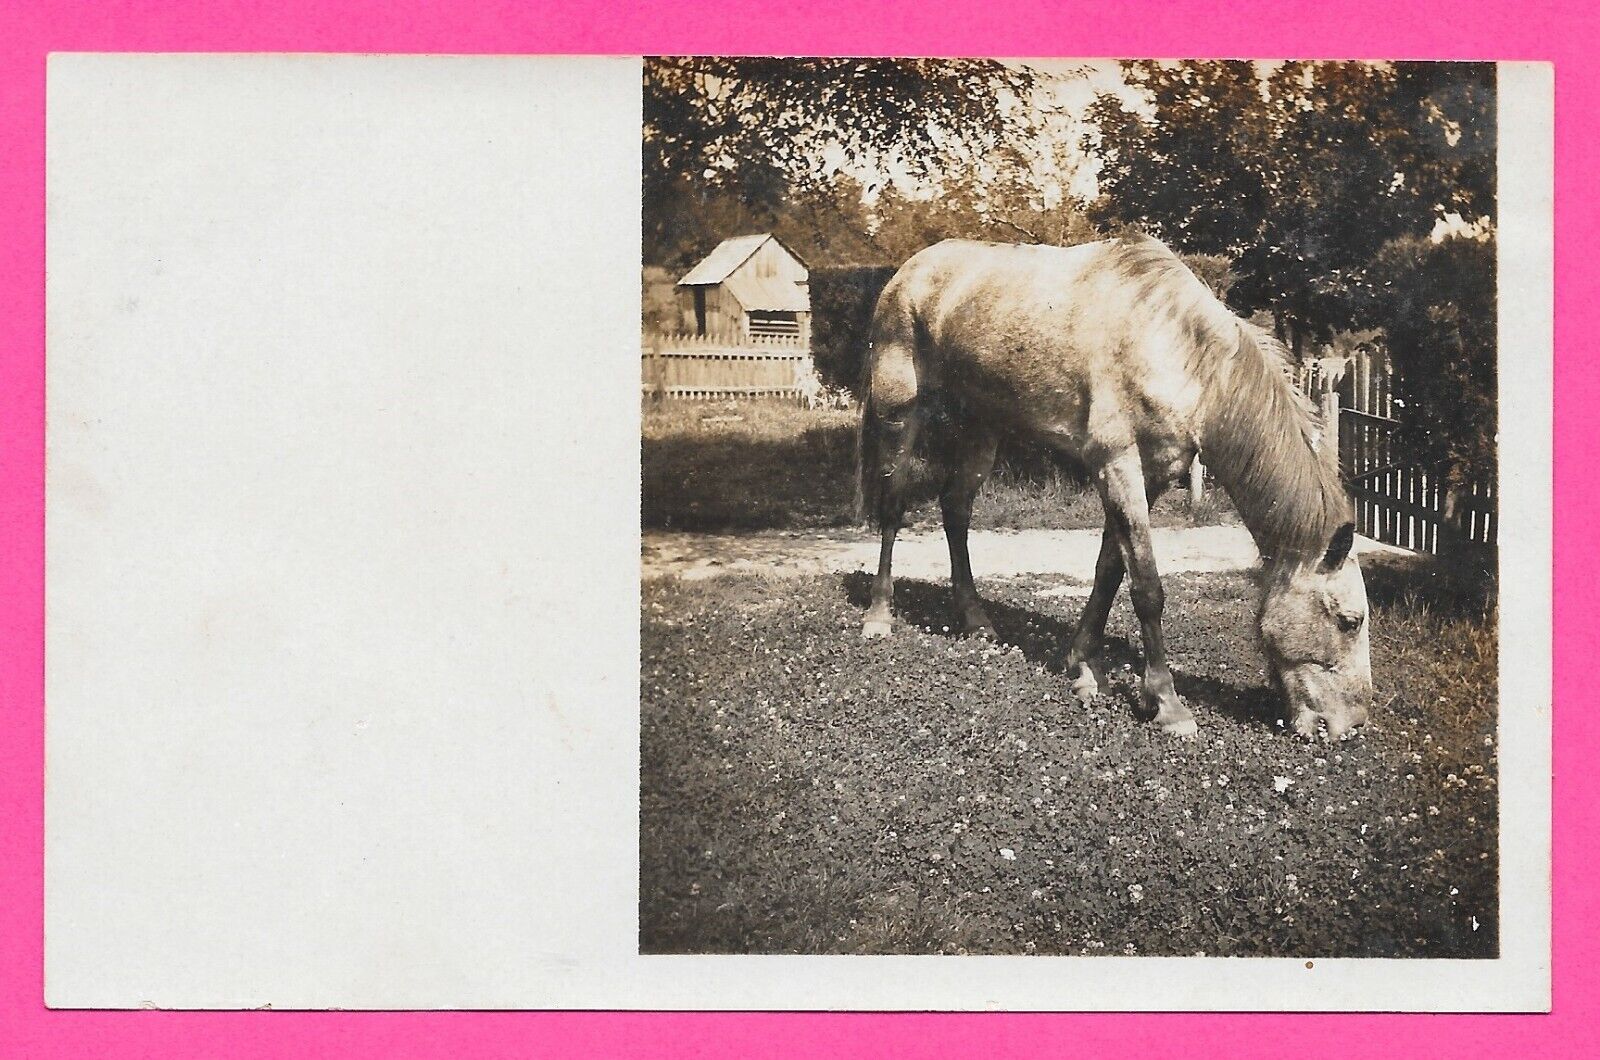 Vintage Original Photo of Horse and Farm in the Carolinas - Post Card